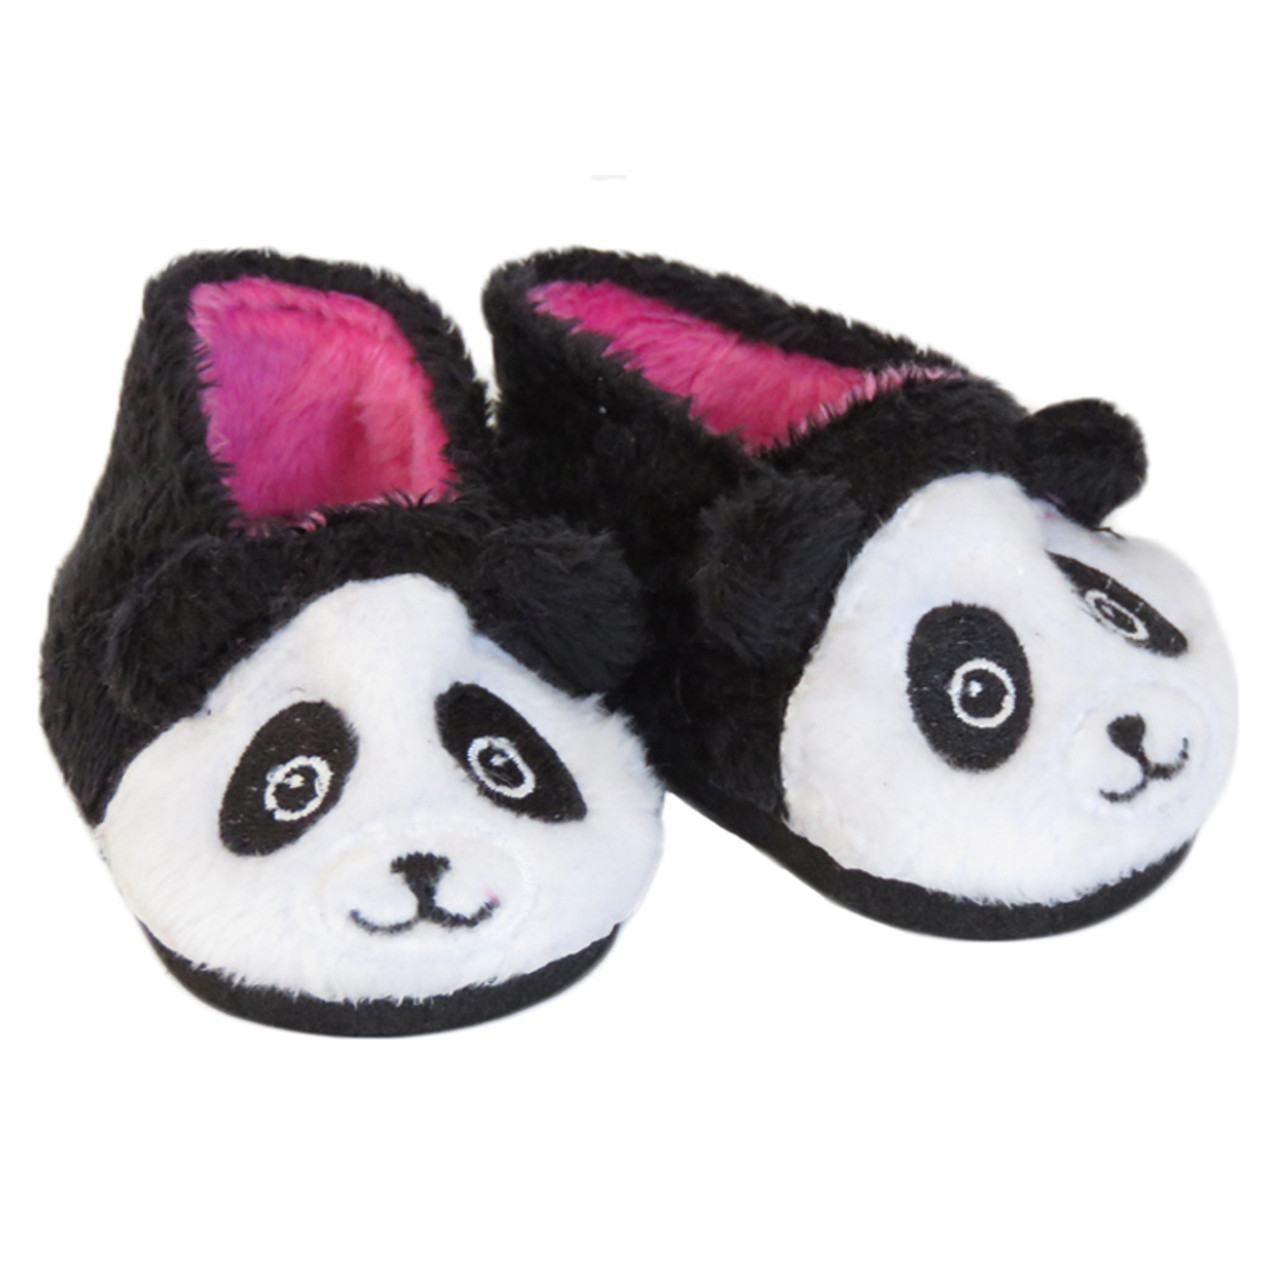 U20. Slippers for dolls - Silly